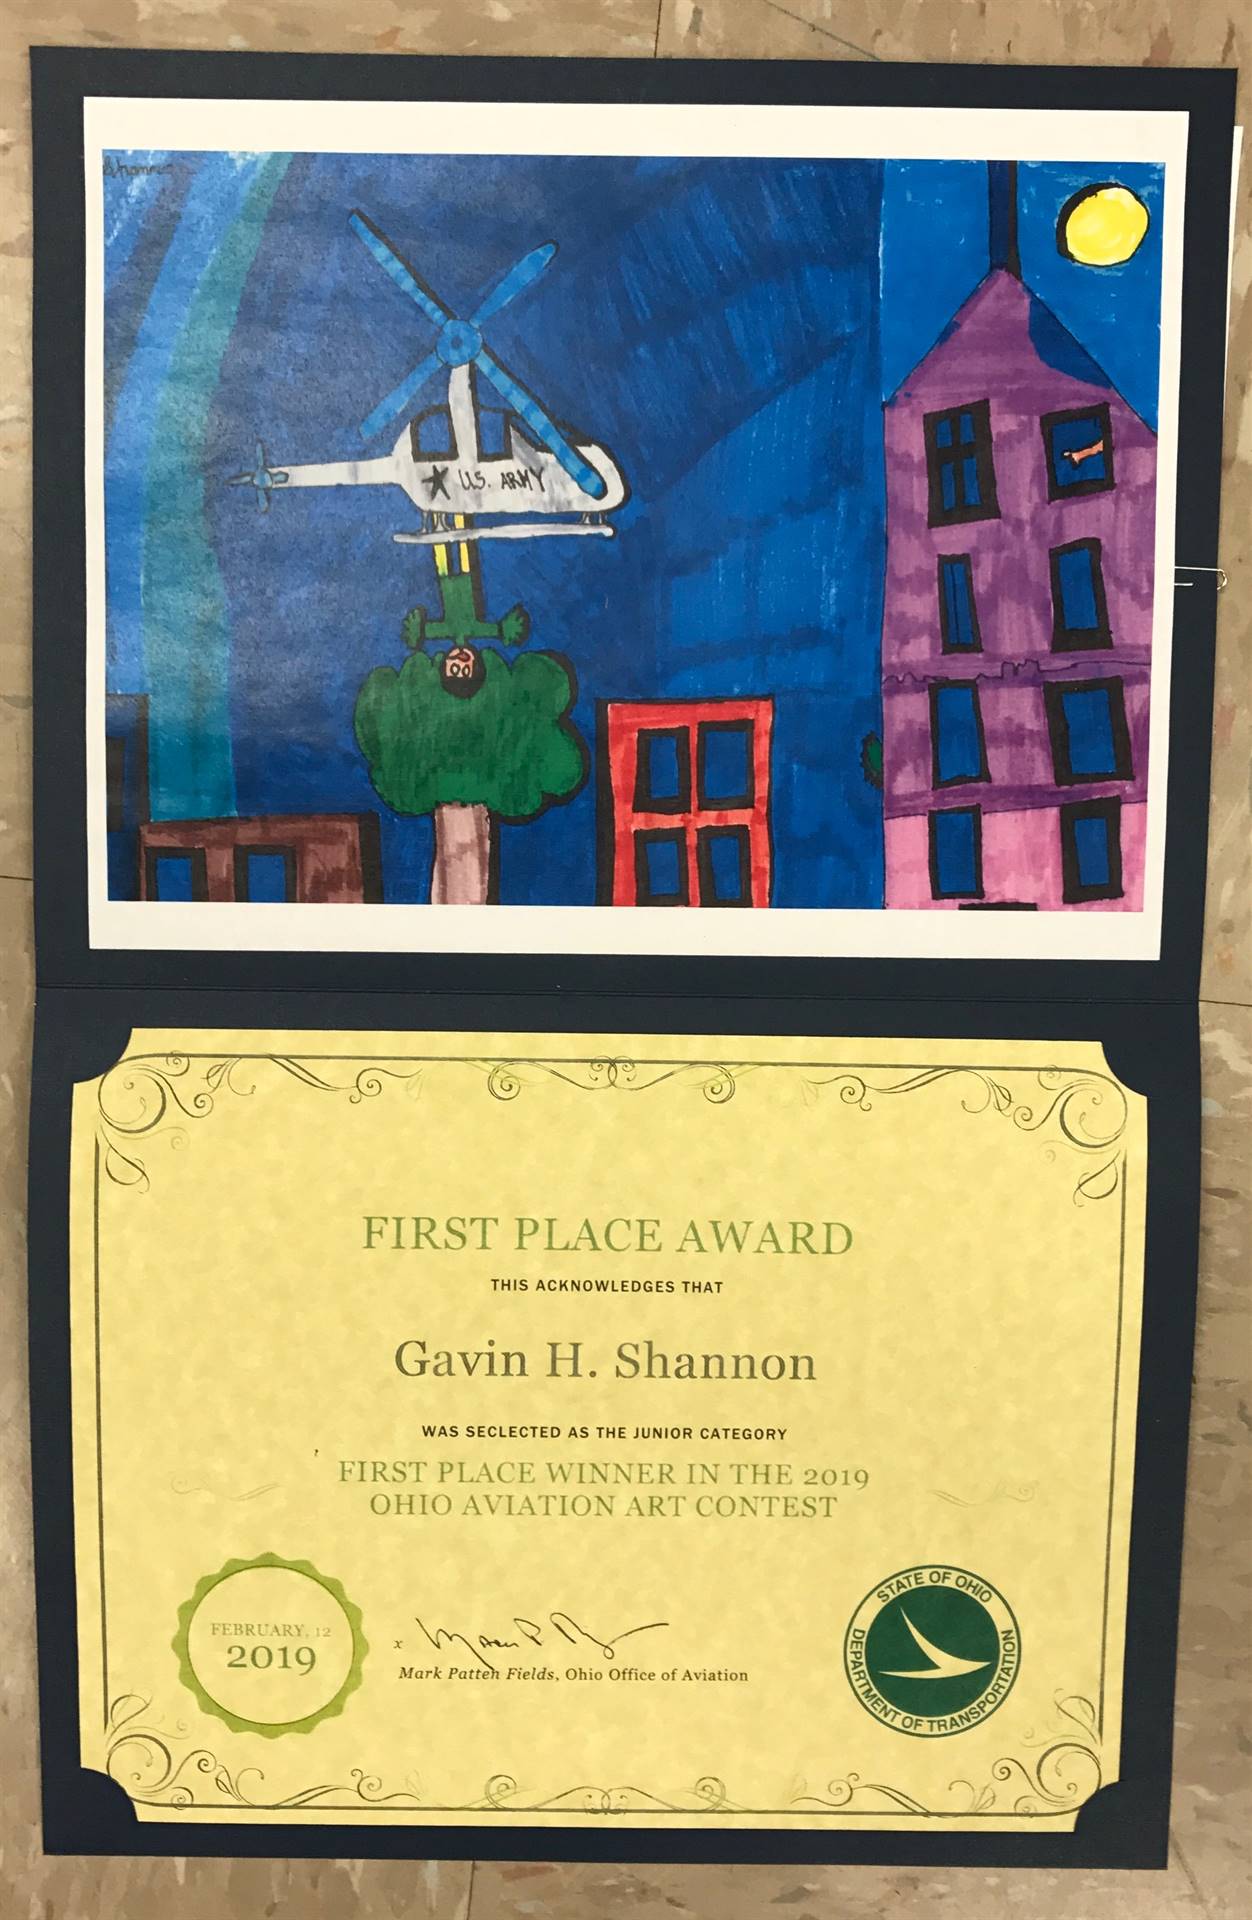 Student art display winner depicting US Army helicopter and houses.